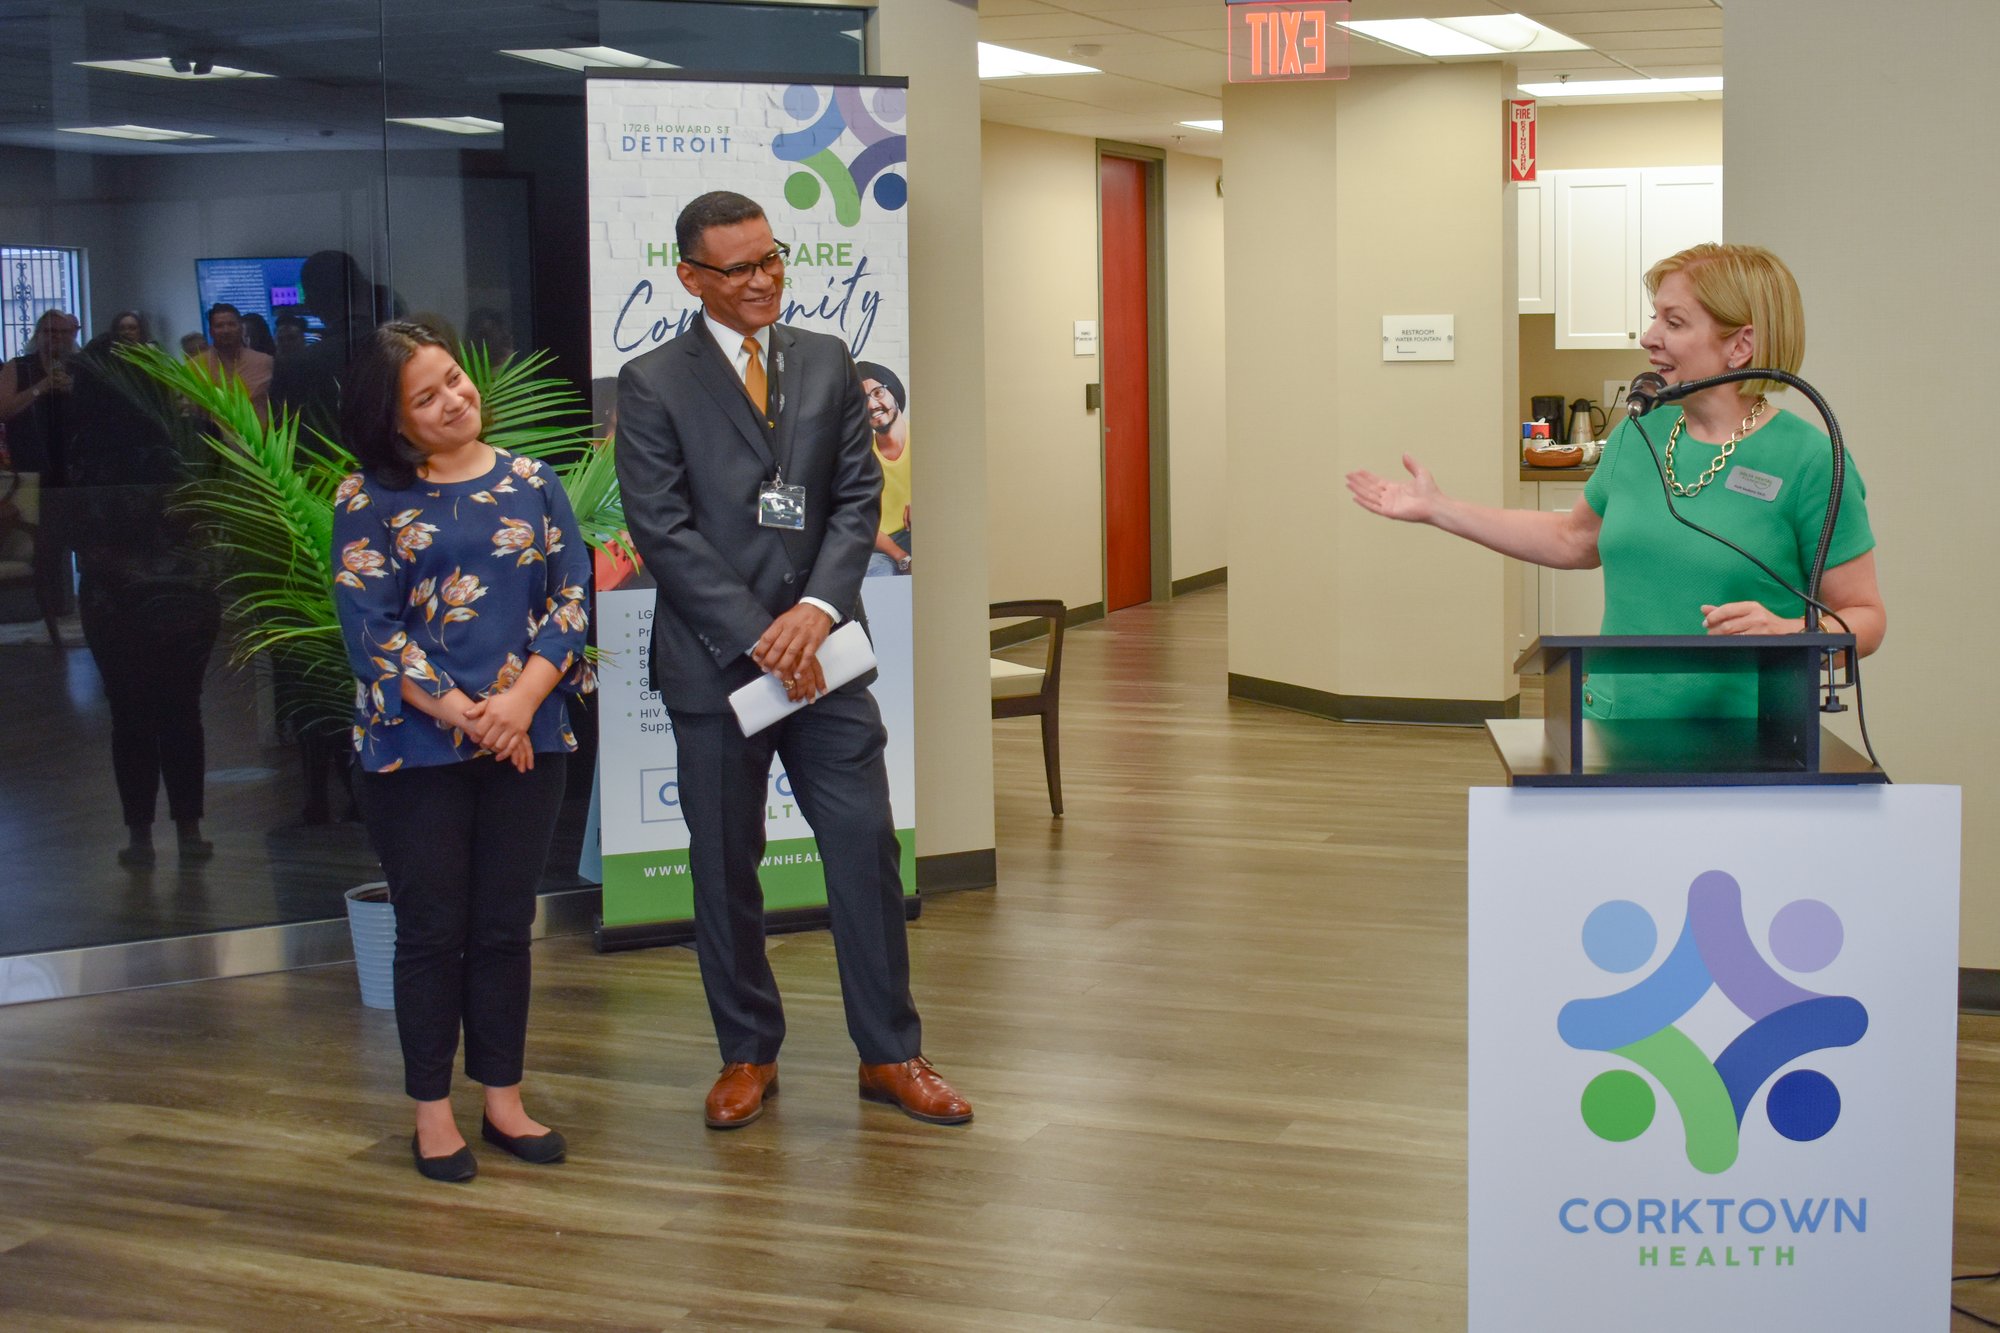 Holli Seabury stands behind a lectern with Corktown Health's logo. She gestures back at Anthony Williams and Gabriela Santiago-Romero, who are standing to the side.